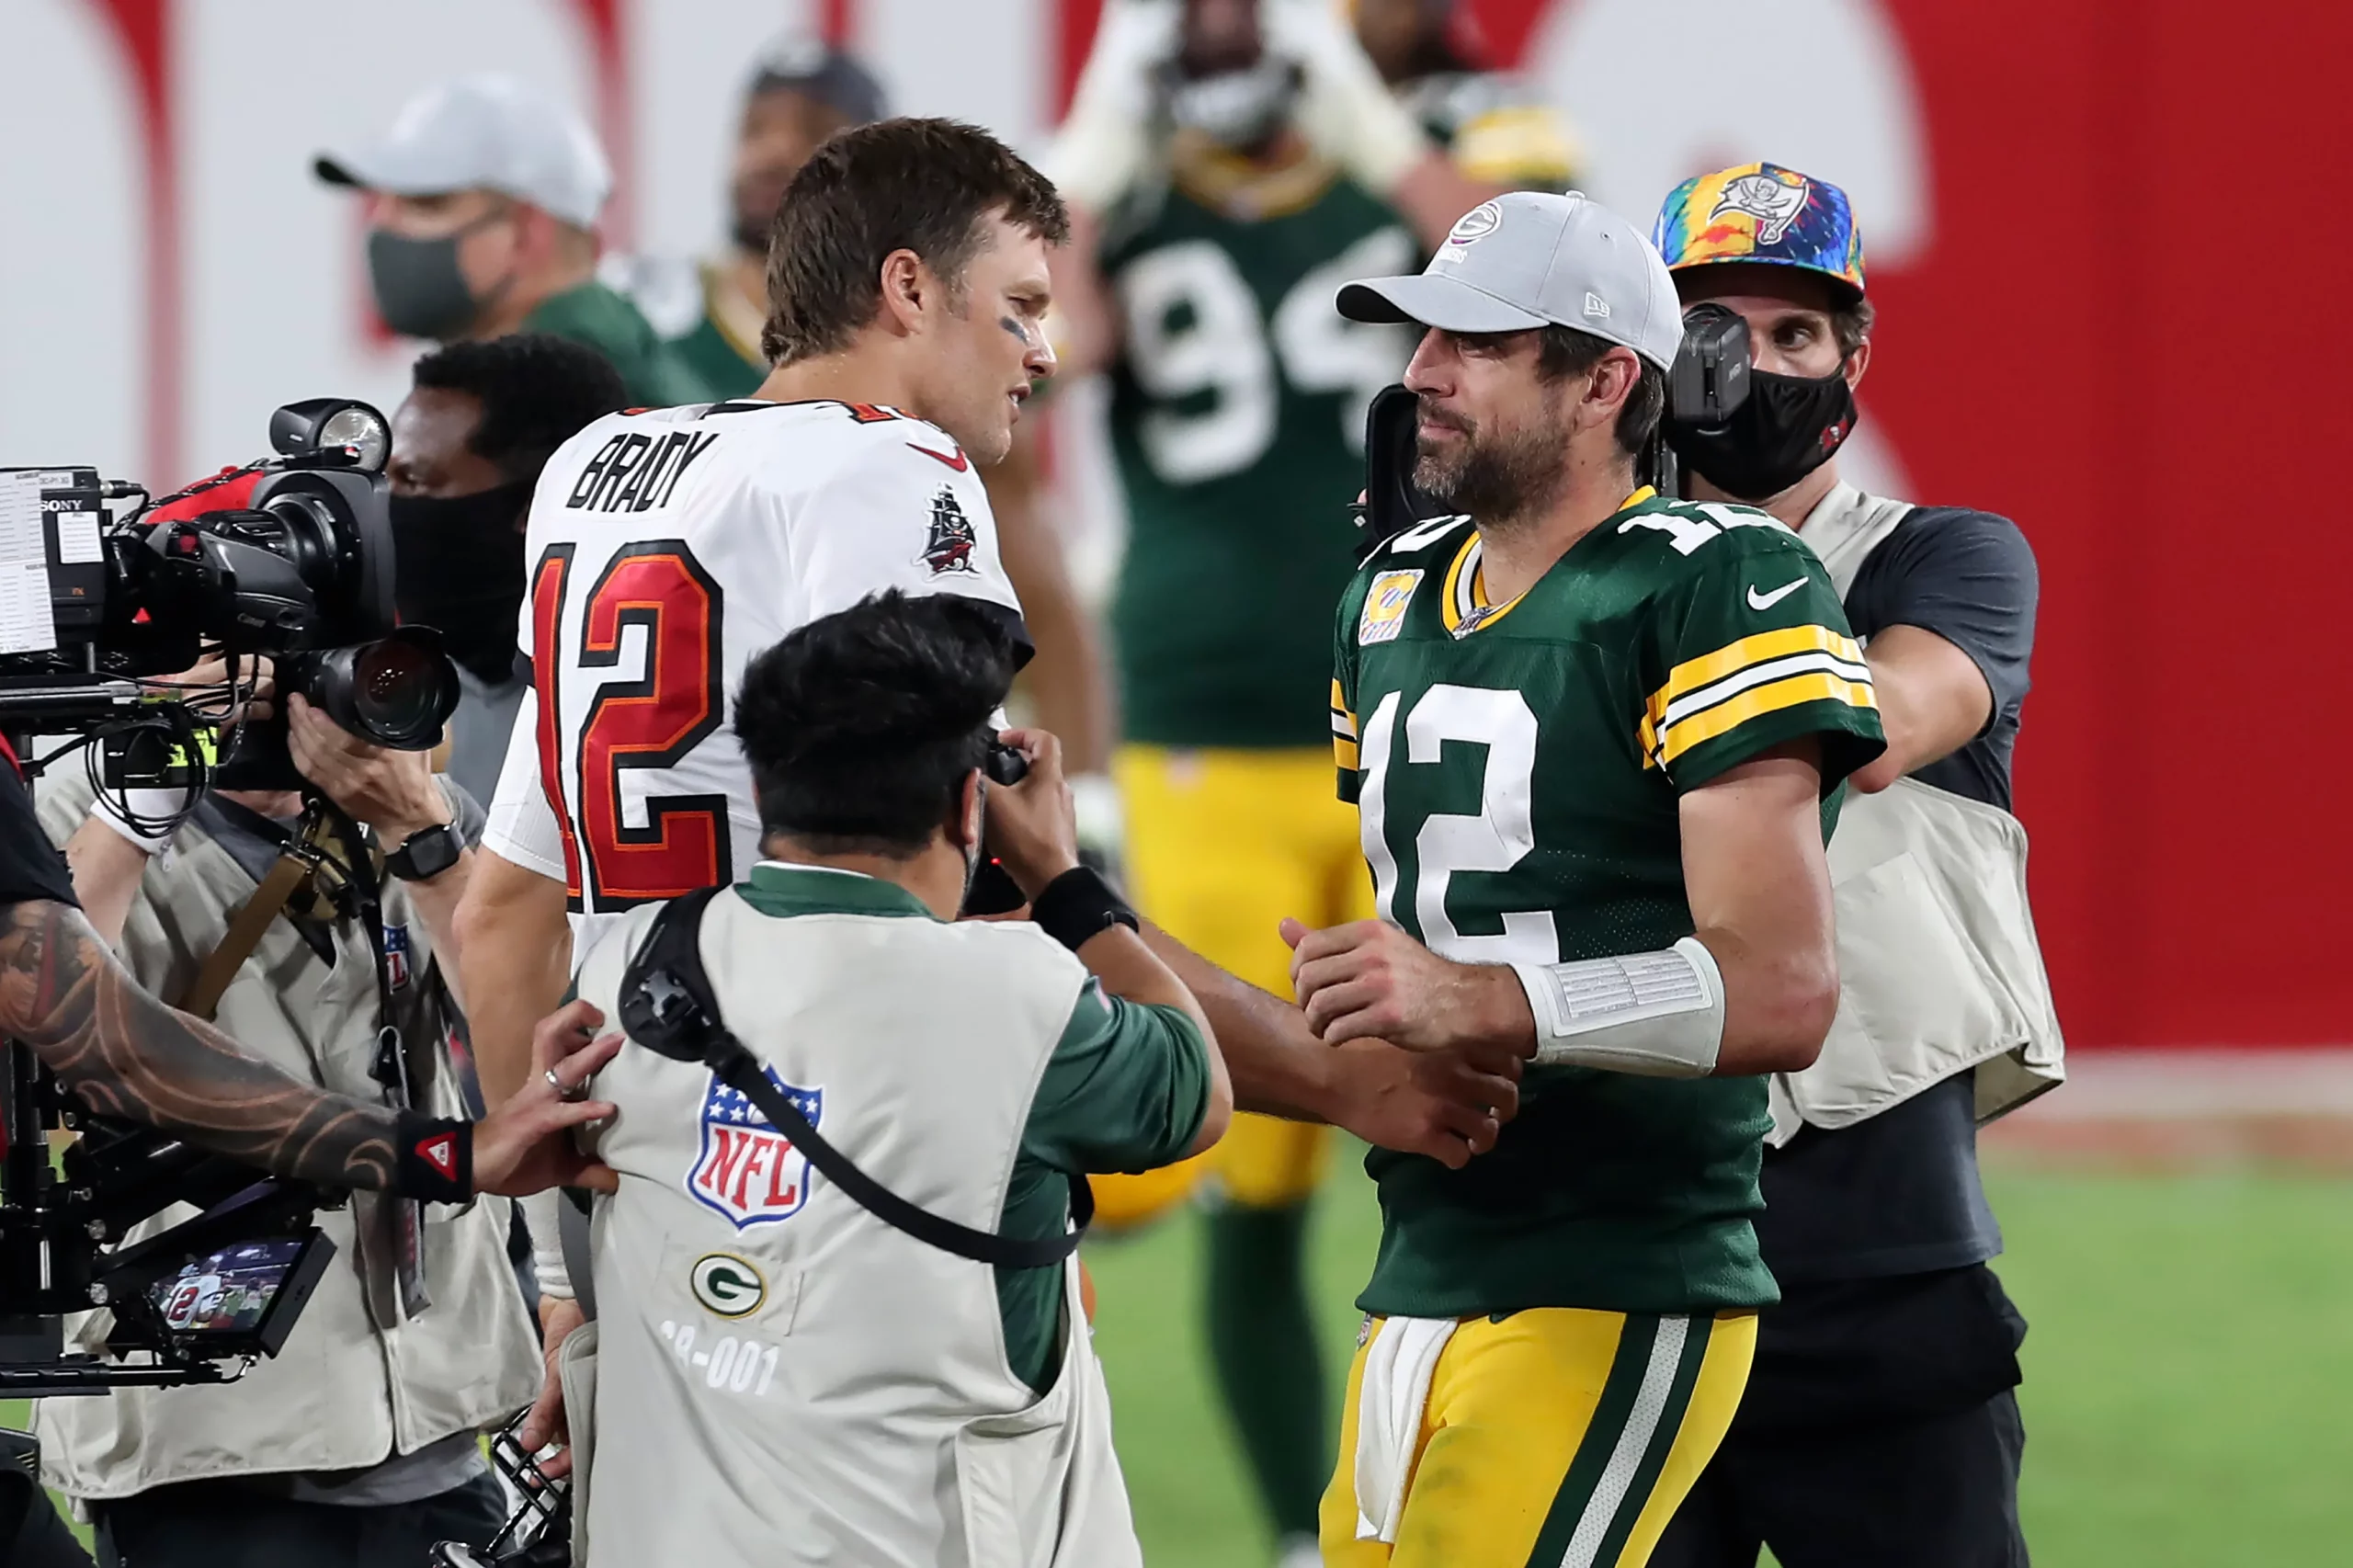 NFL Quarterbacks Aaron Rodgers and Tom Brady. Photo provided by Kassidy Hill/Packers News .